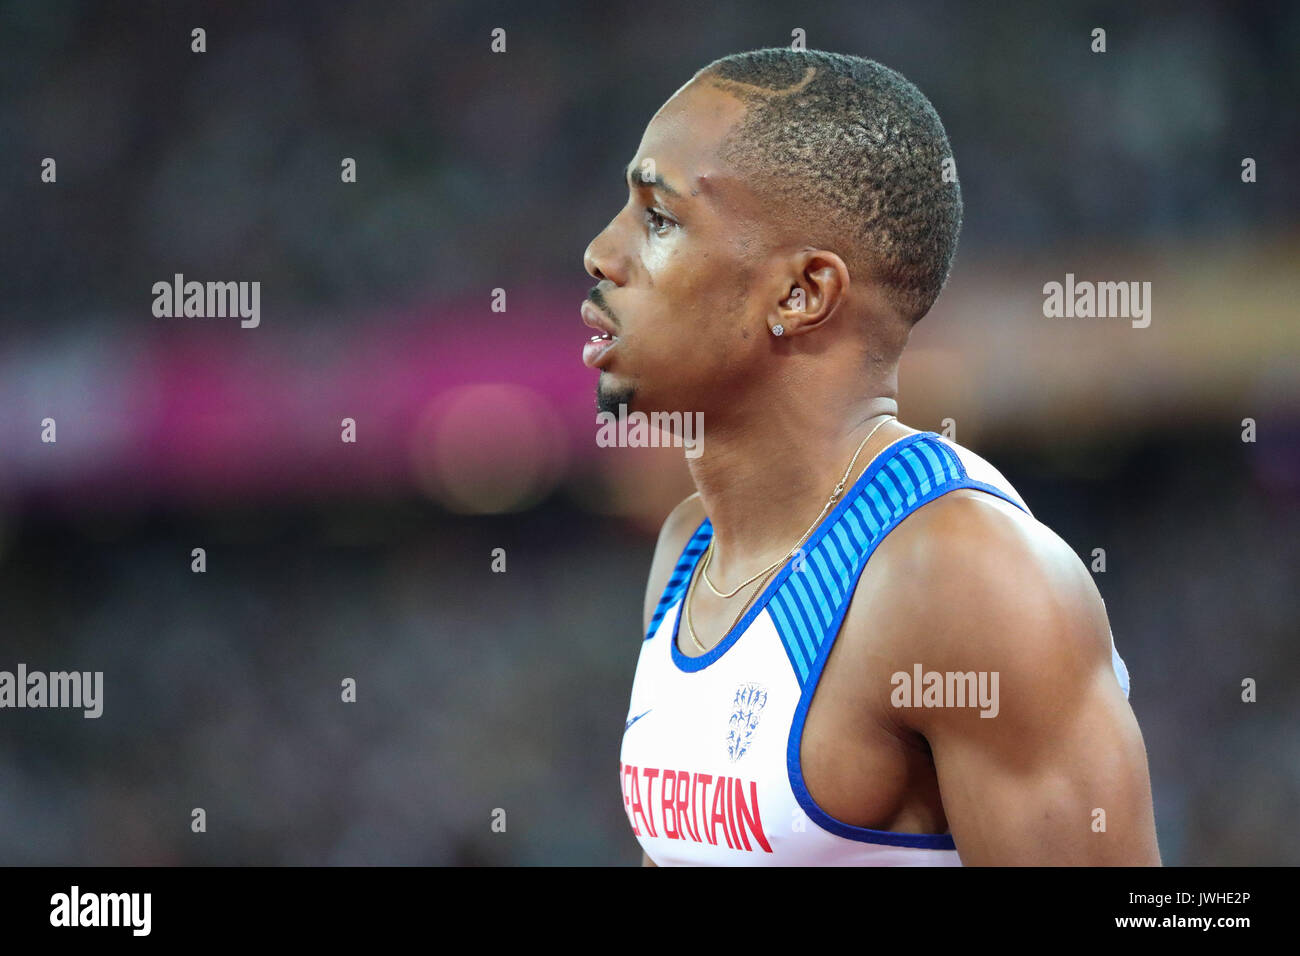 London, UK. 12th Aug, 2017. London, August 12 2017 . Chijindu Ujah after winning the the men's 4x 100m relay on day nine of the IAAF London 2017 world Championships at the London Stadium. Credit: Paul Davey/Alamy Live News Stock Photo